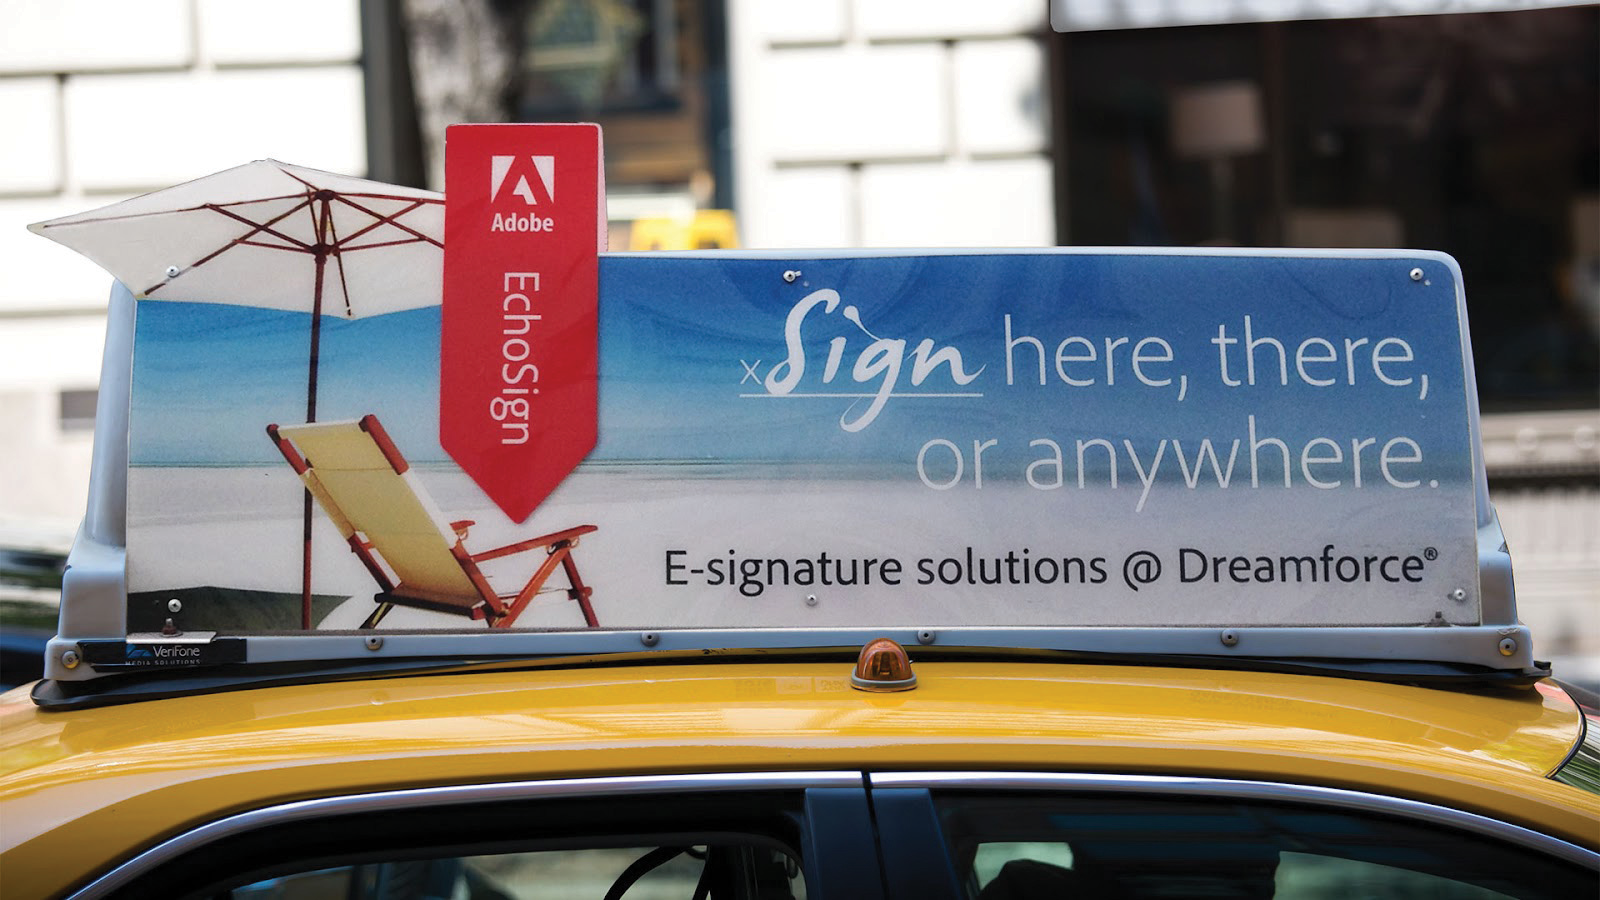 An execution of the creative on a cab. The advert is of a sunny beach, with the message "Echo Sign" pointing to a deck chair.